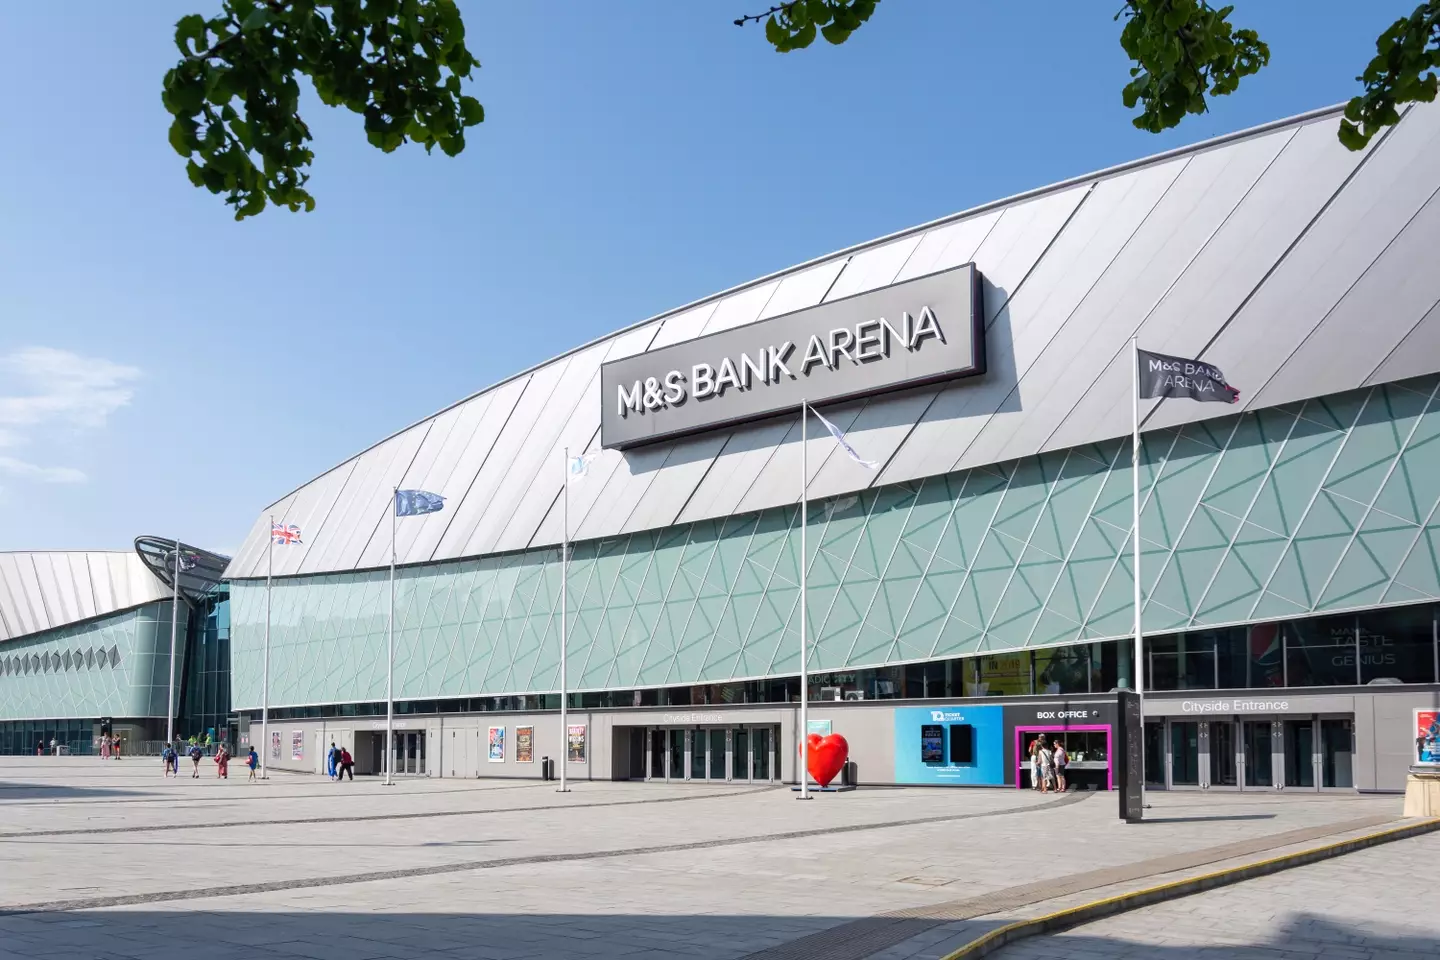 This year's event is at the M&S Bank Arena in Liverpool.